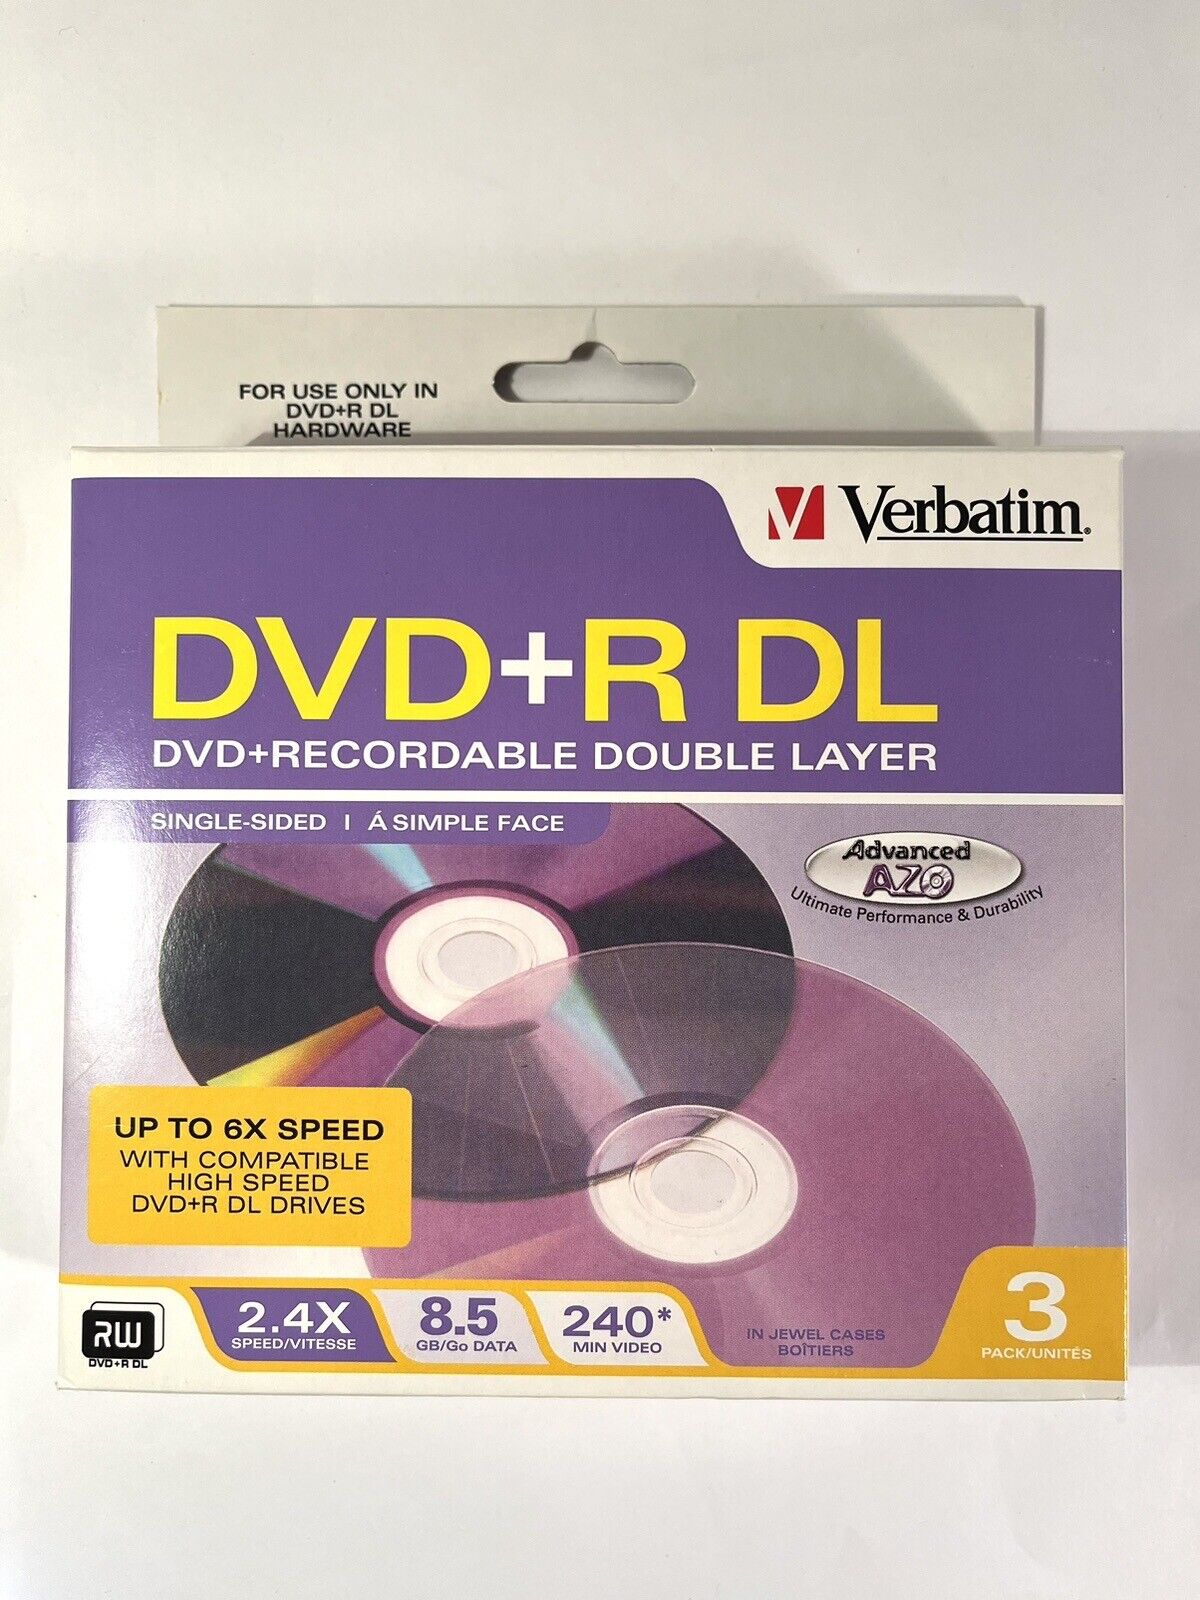 3-Pack Verbatim 8.5 GB 2.4X DVD+R DL Recordable Double Layer Disc w/ Jewel Cases